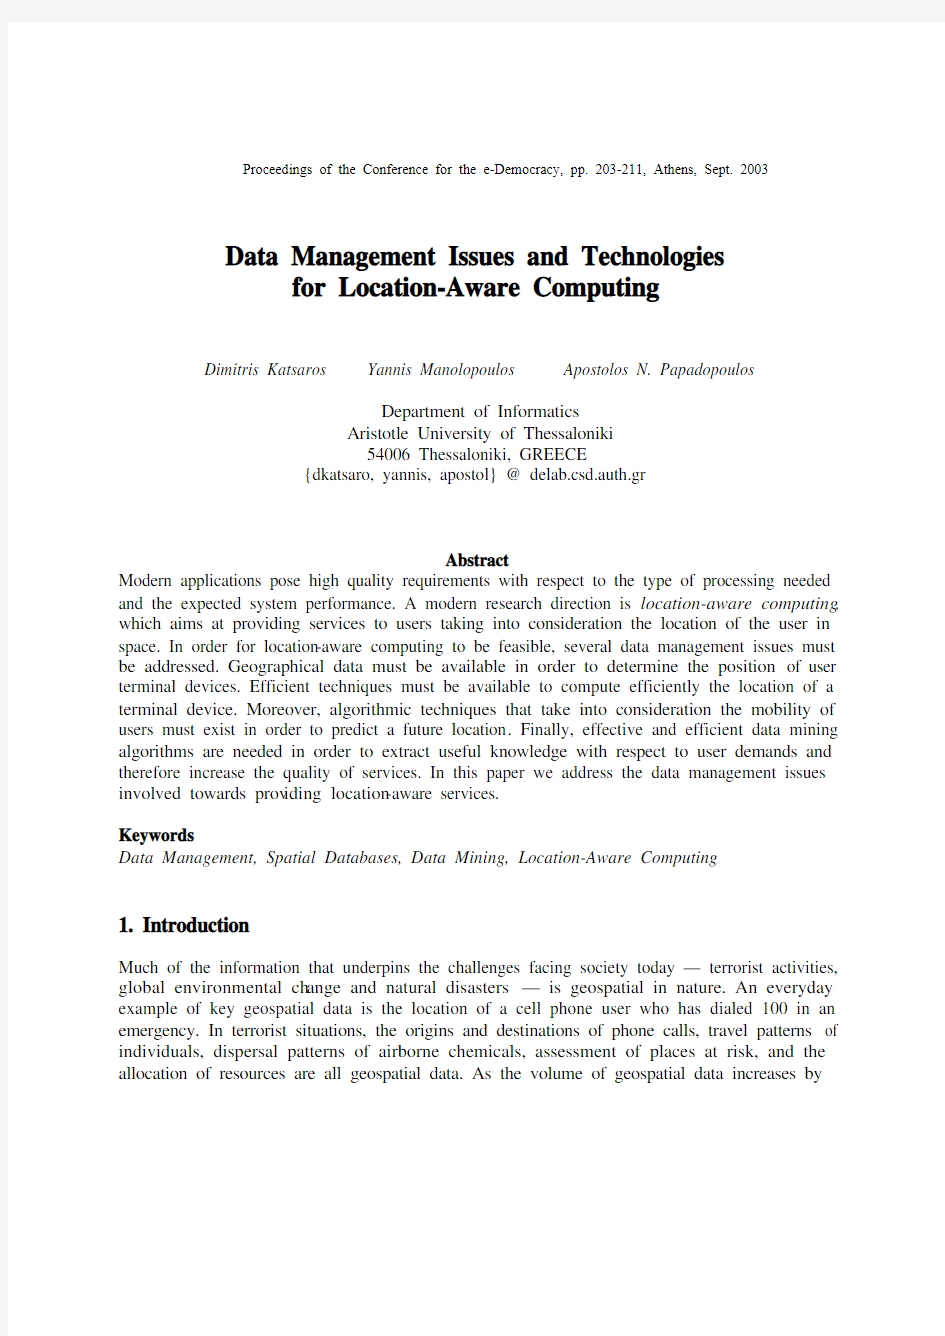 Data Management Issues and Technologies for Location-Aware Computing